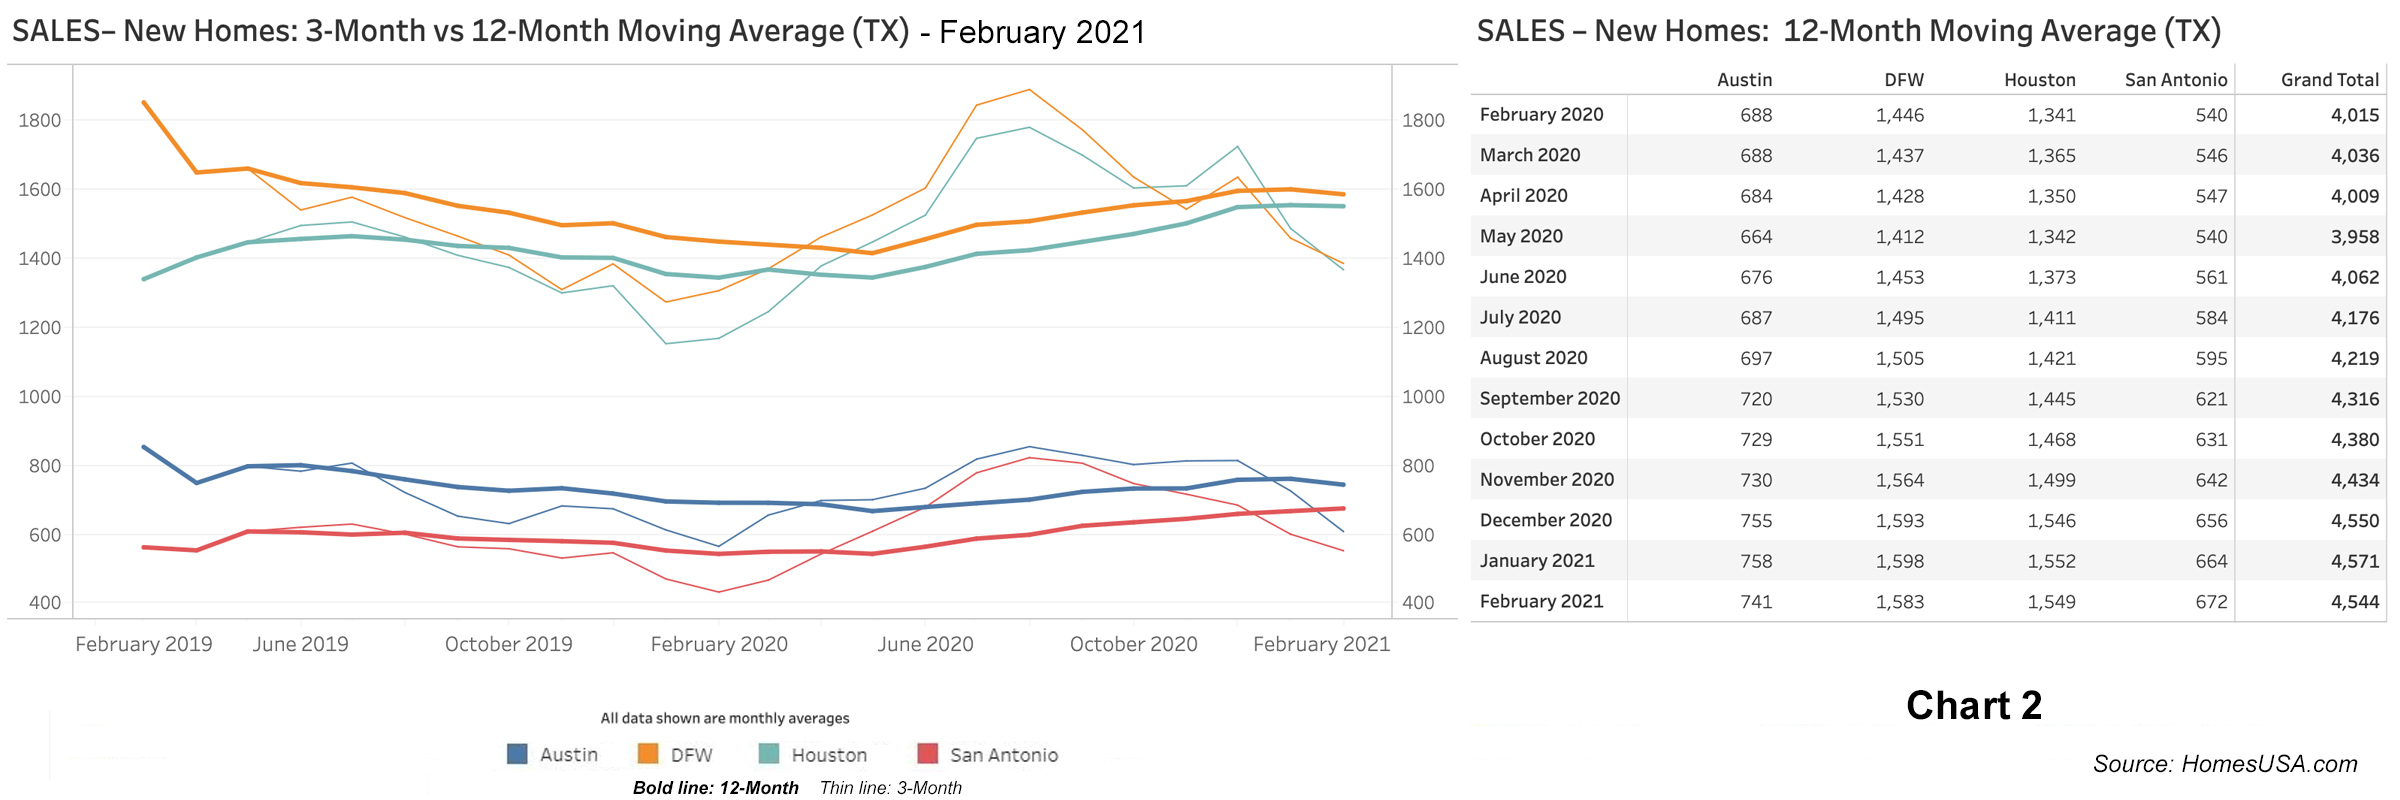 Chart 2: Texas New Home Sales - February 2021